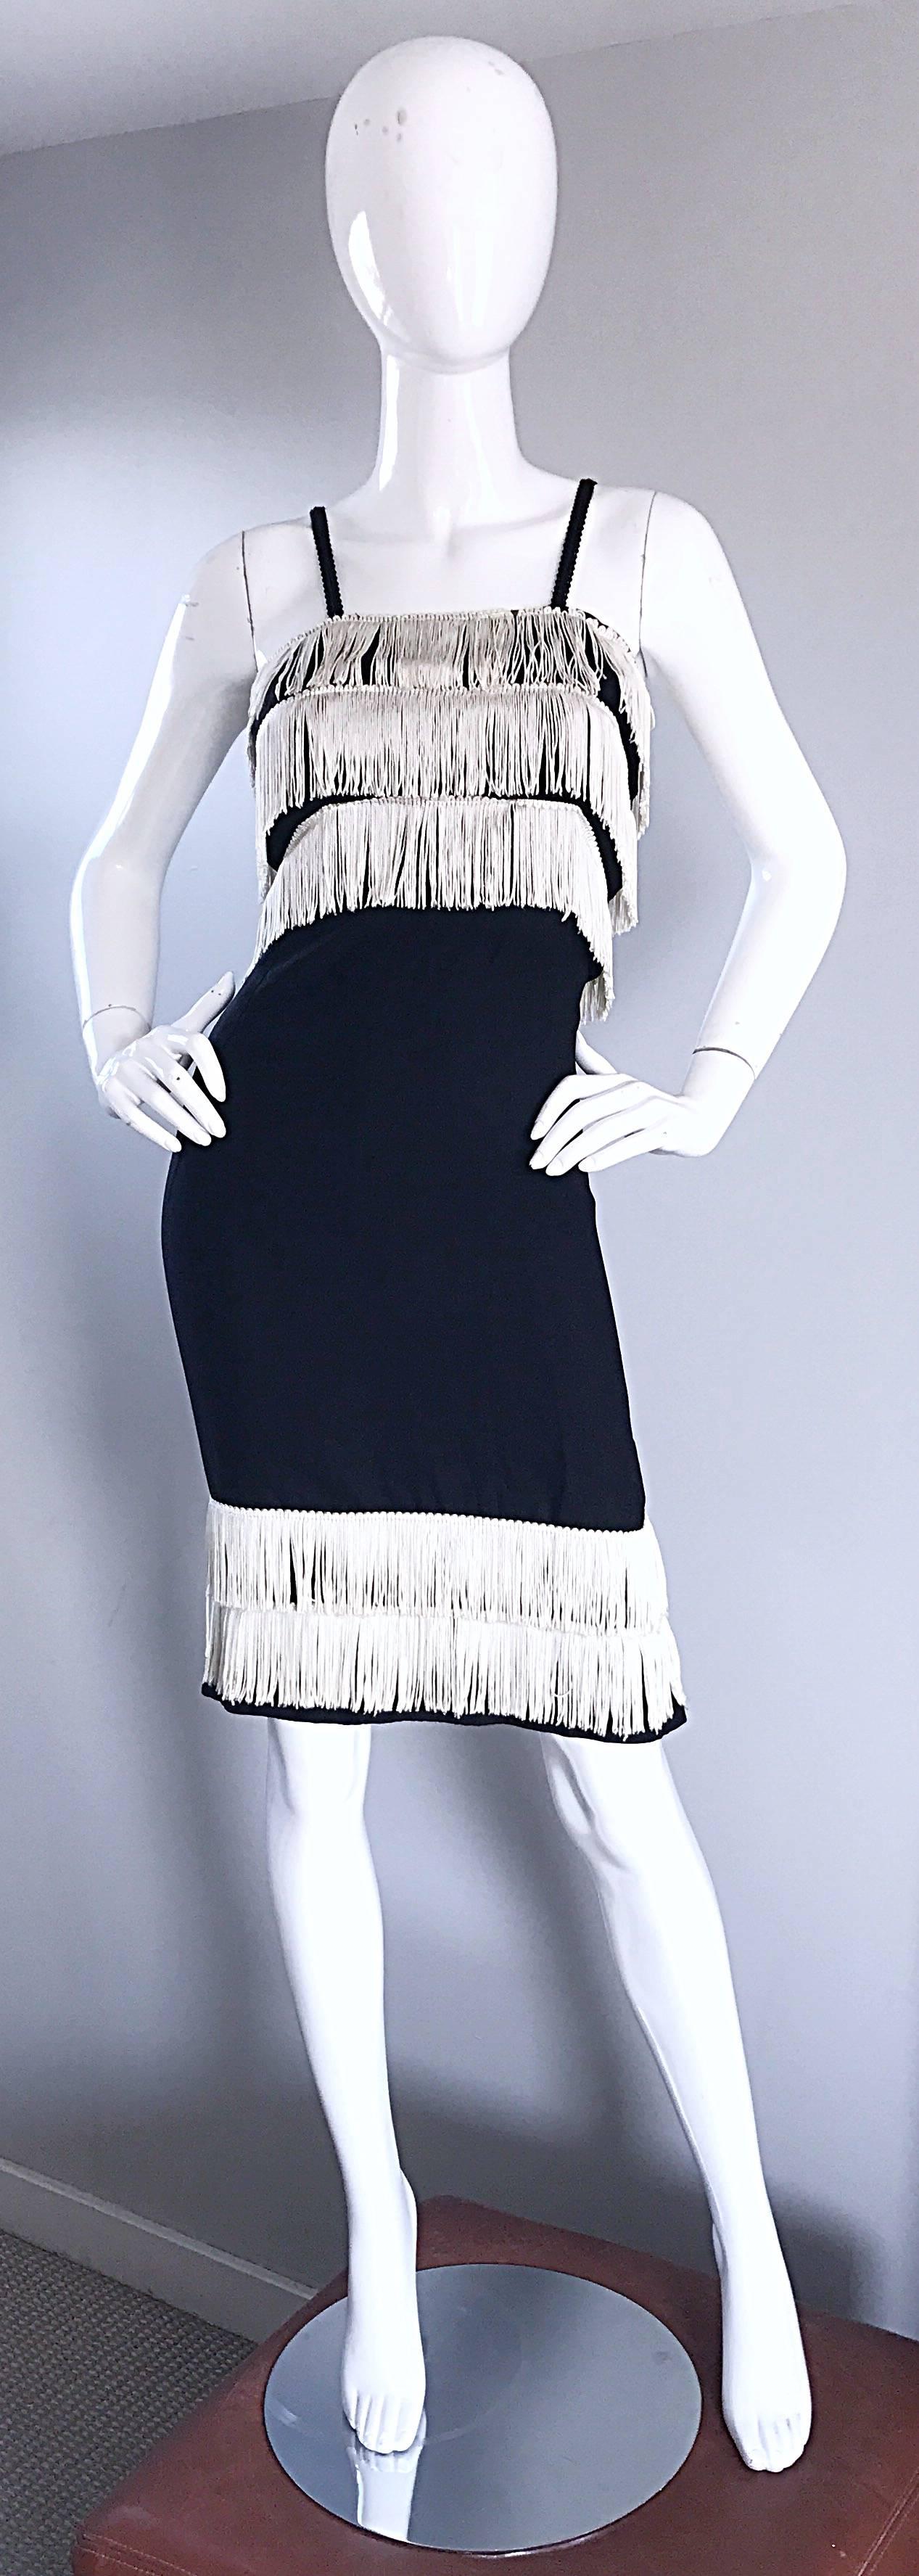 Chic 1950s black and white fringe flapper fringe dress, with a 1920s twist! Wonderful soft black crepe, with a body hugging wiggle fit. Fringe at bust and hem. Full metal zipper with hook-and-eye closure. Looks amazing on! Great for any day or